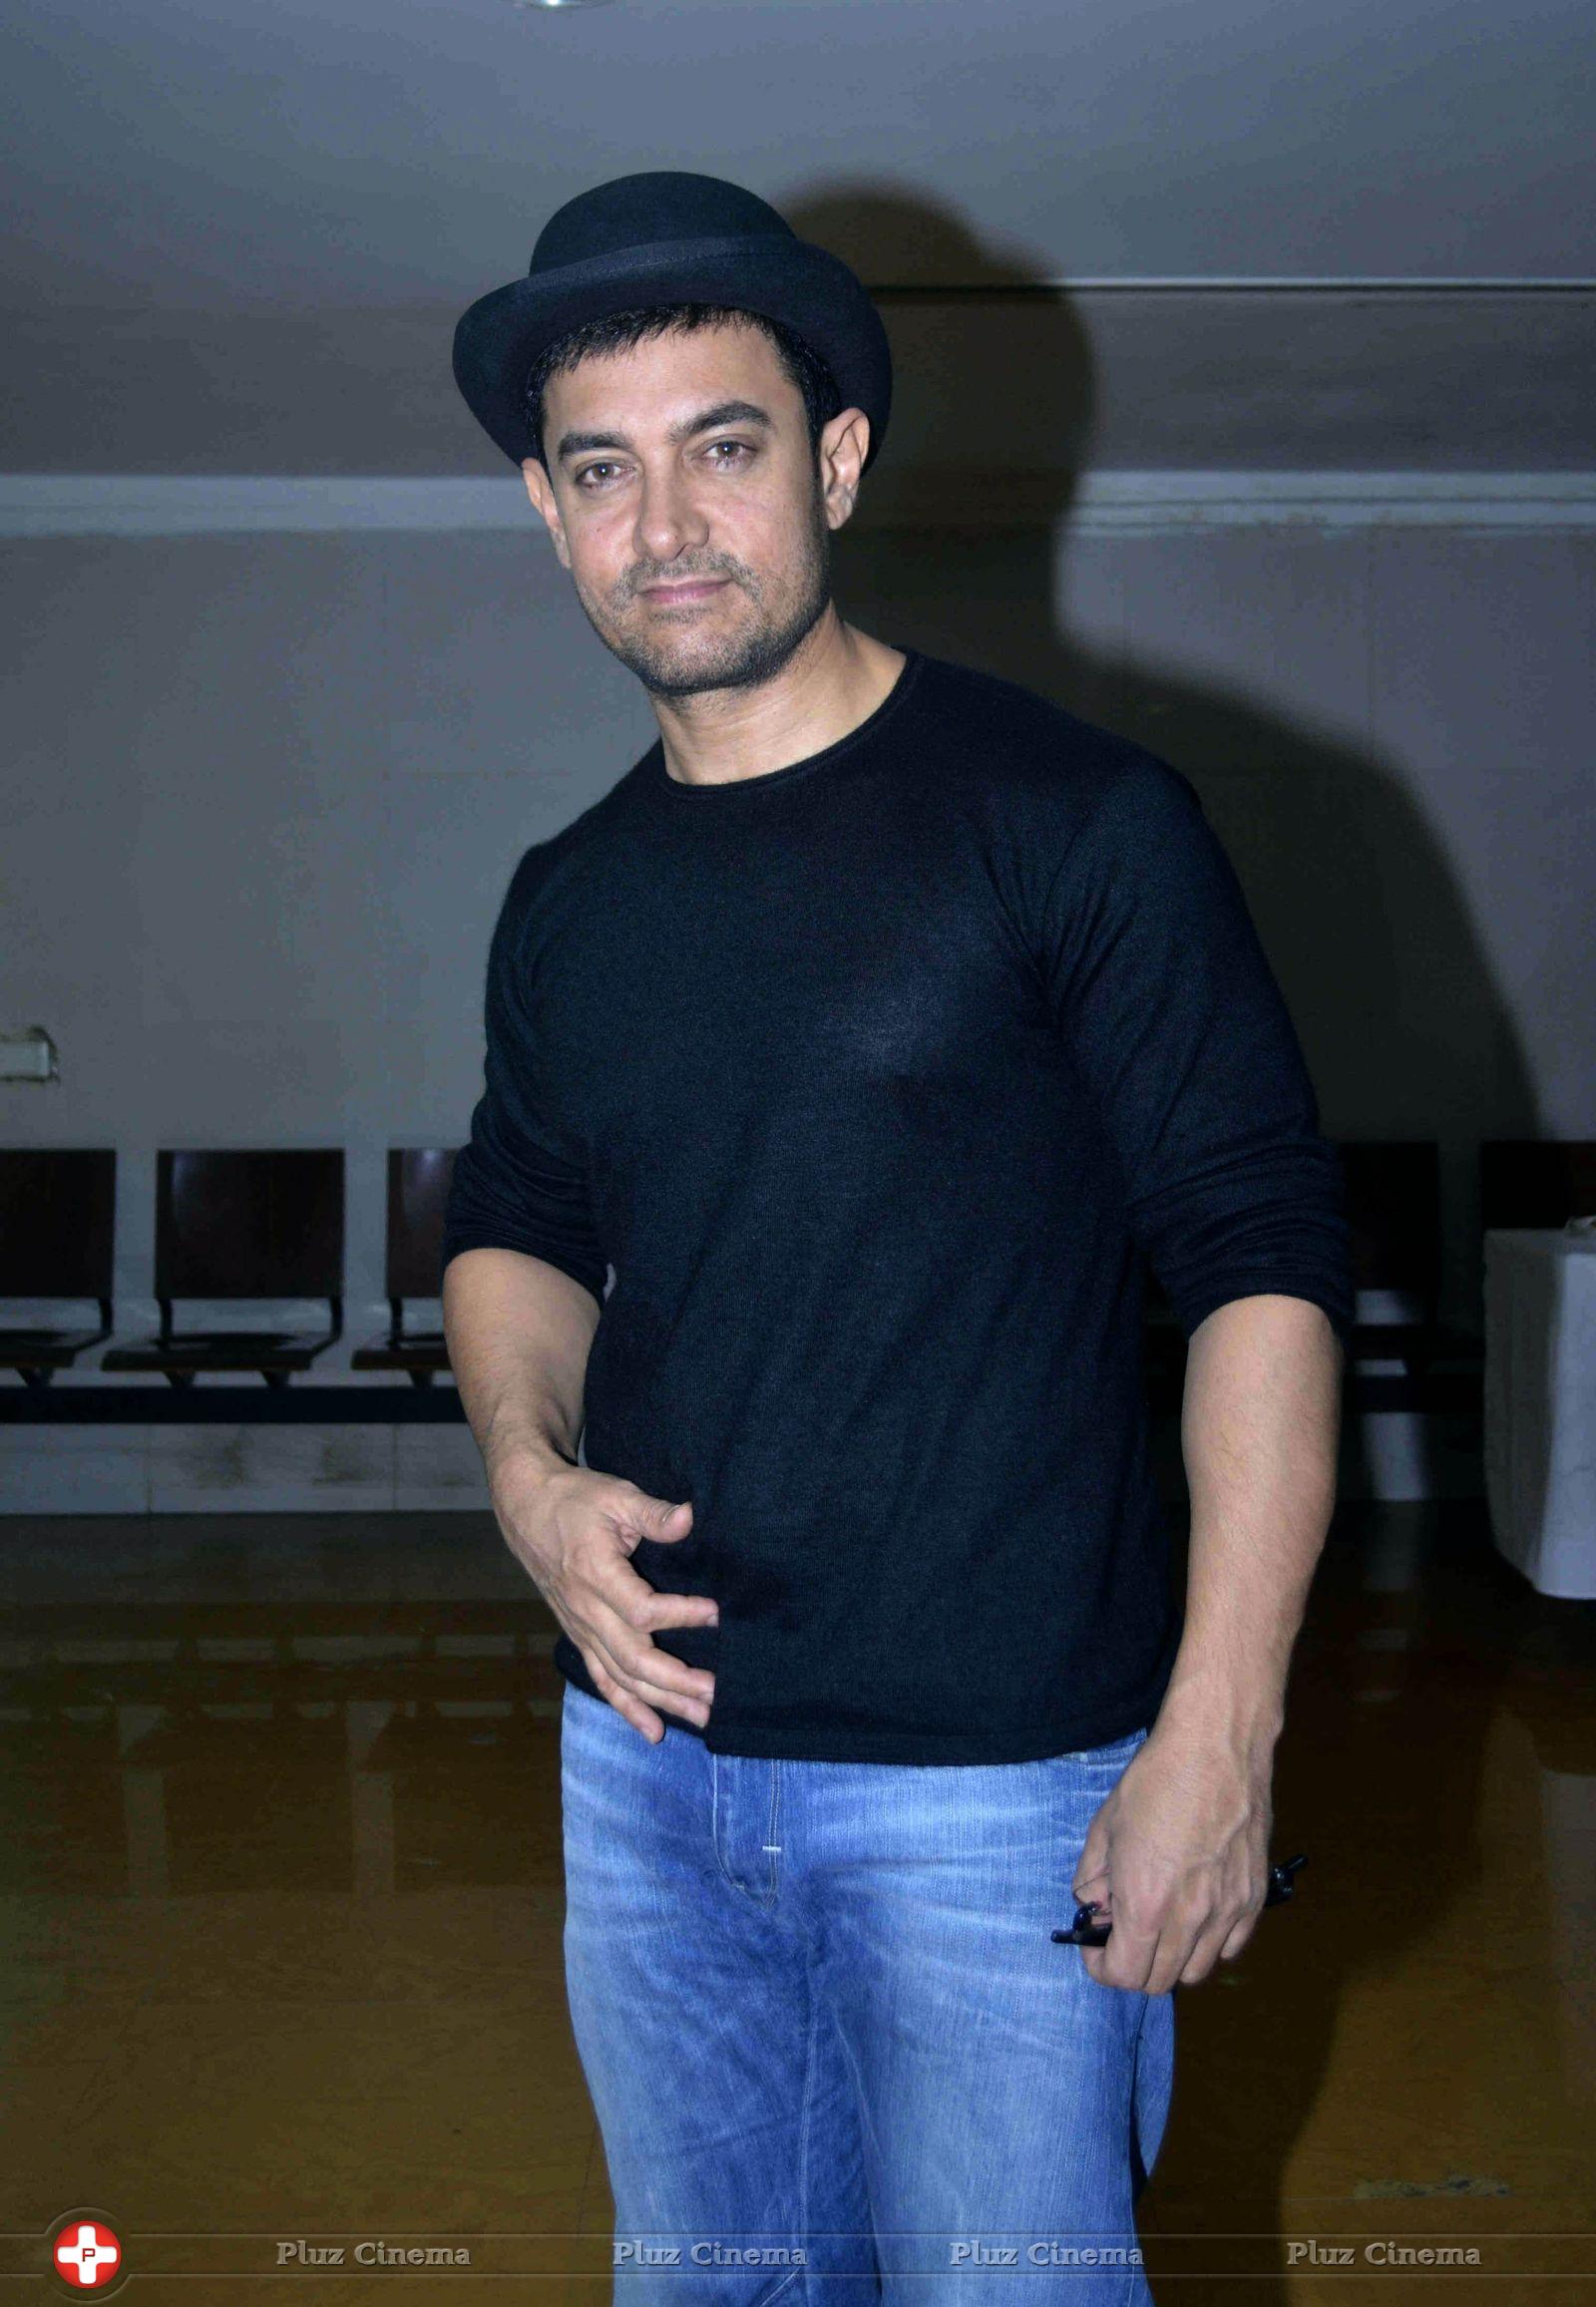 Aamir Khan - Aamir Khan press conference on Dhoom 3 Ticket Prices Photos | Picture 682335